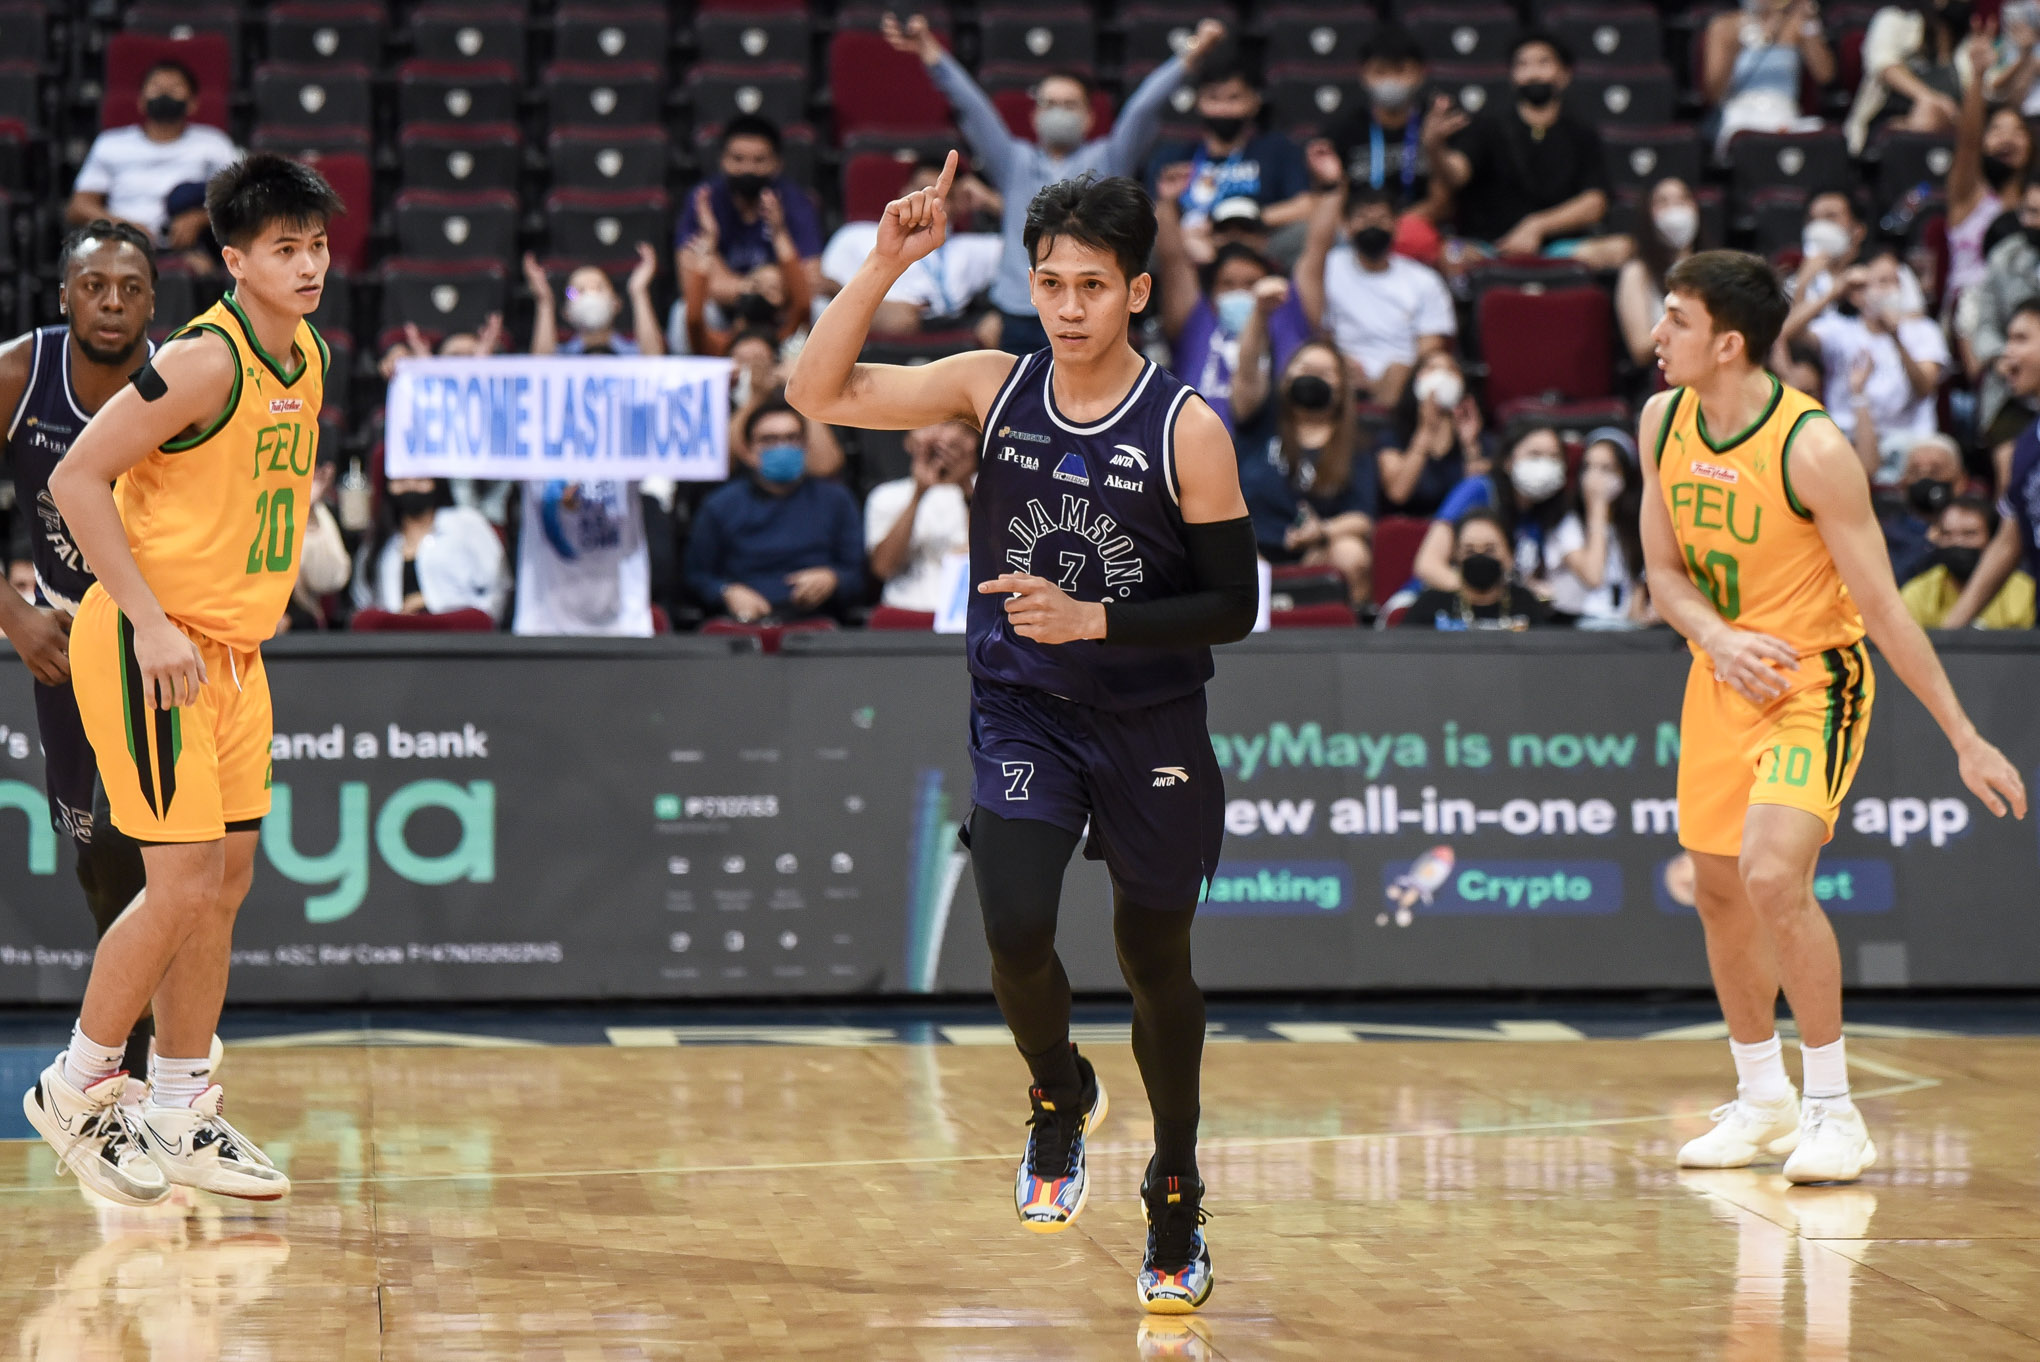 UAAP85-MBB-JEROM-LASTIMOSA-1 Jerom Lastimosa still delivers despite not playing in natural position AdU Basketball News UAAP  - philippine sports news